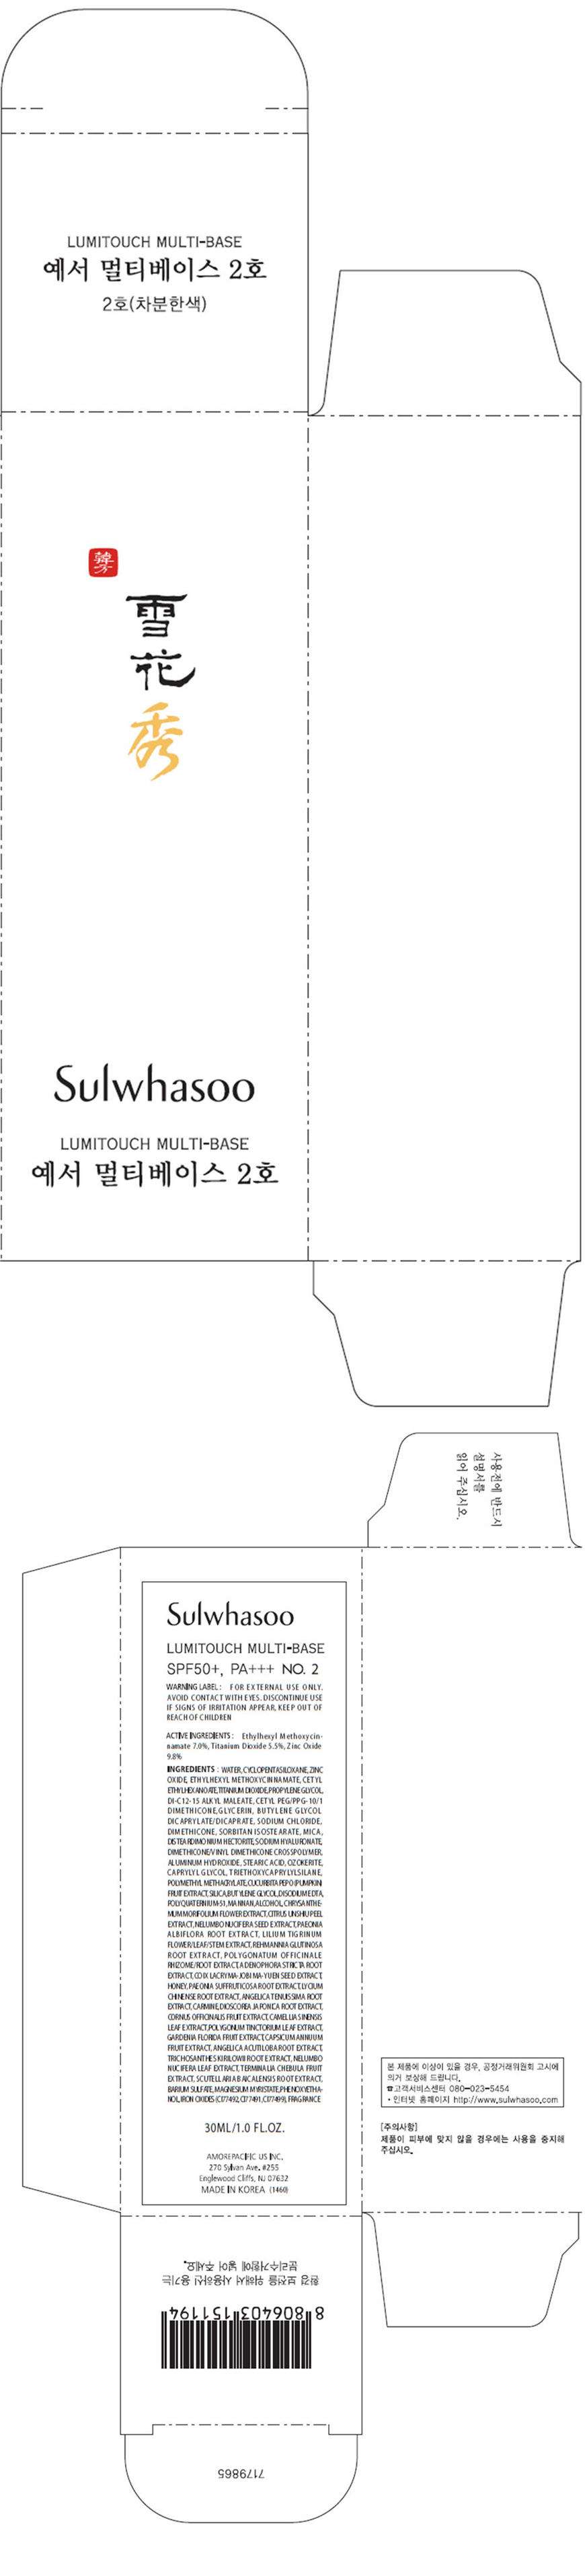 Sulwhasoo Lumitouch Multi-Base